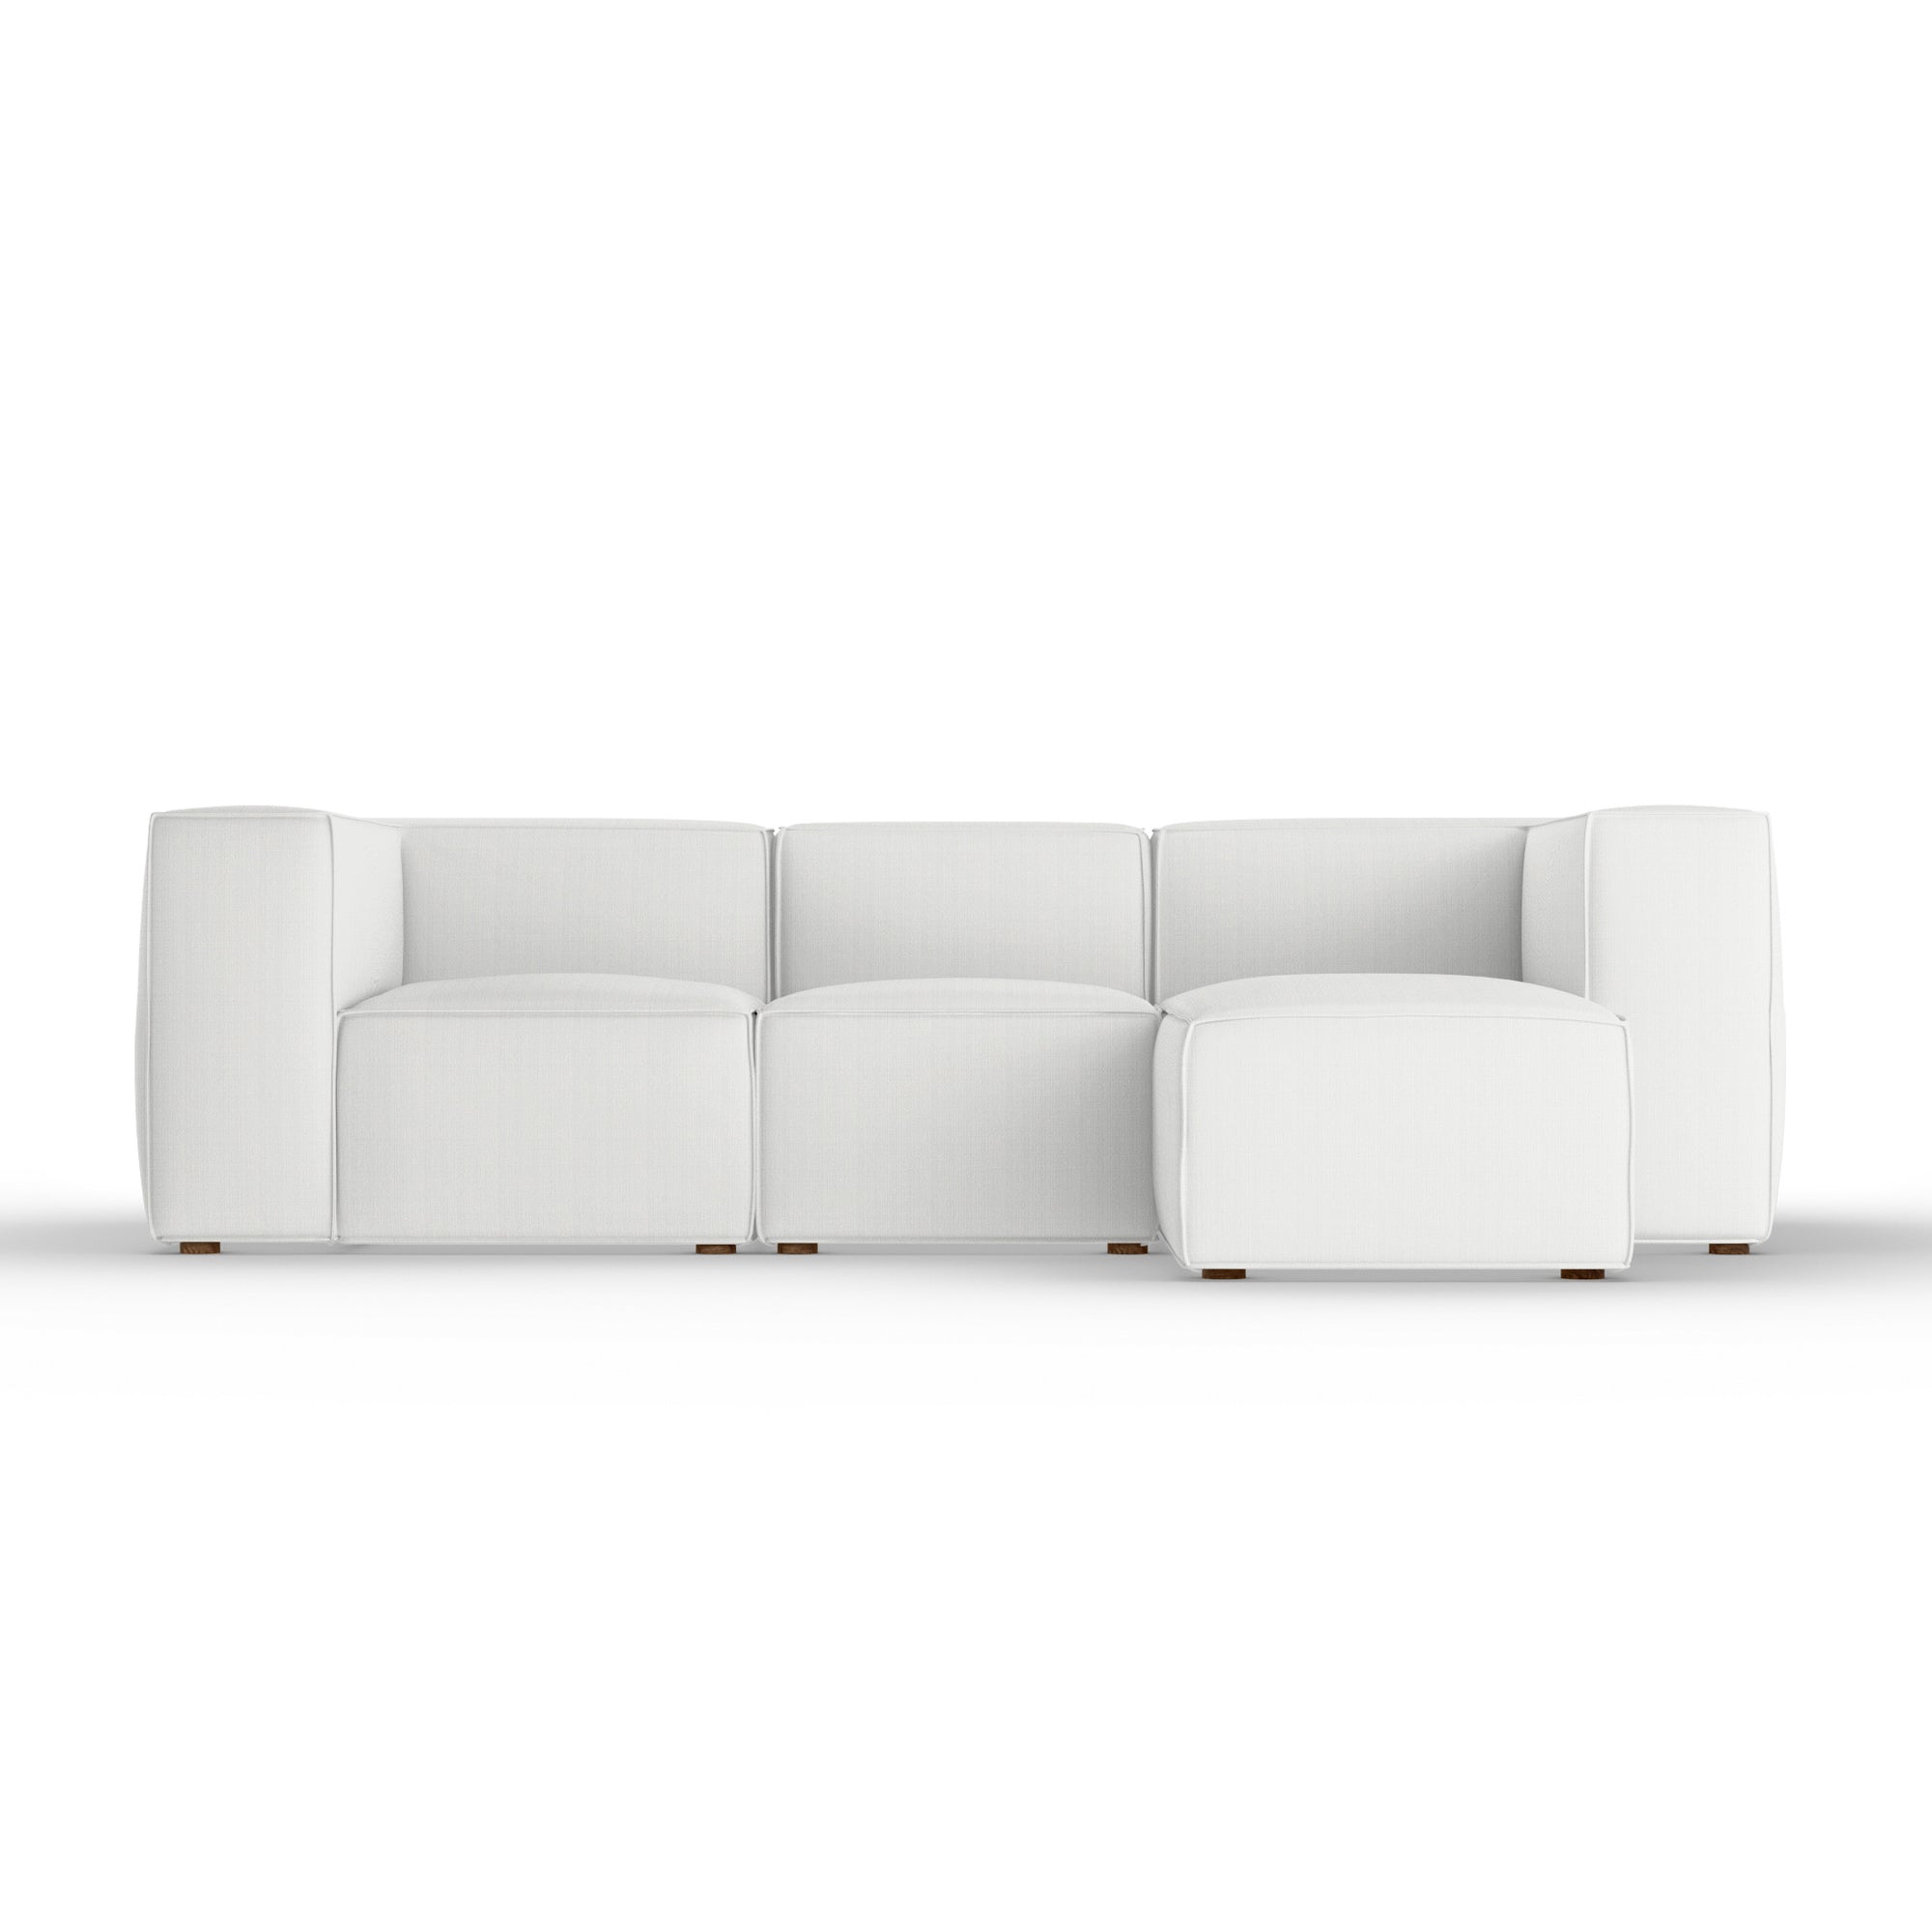 Varick Right-Chaise Sectional - Blanc Box Weave Linen